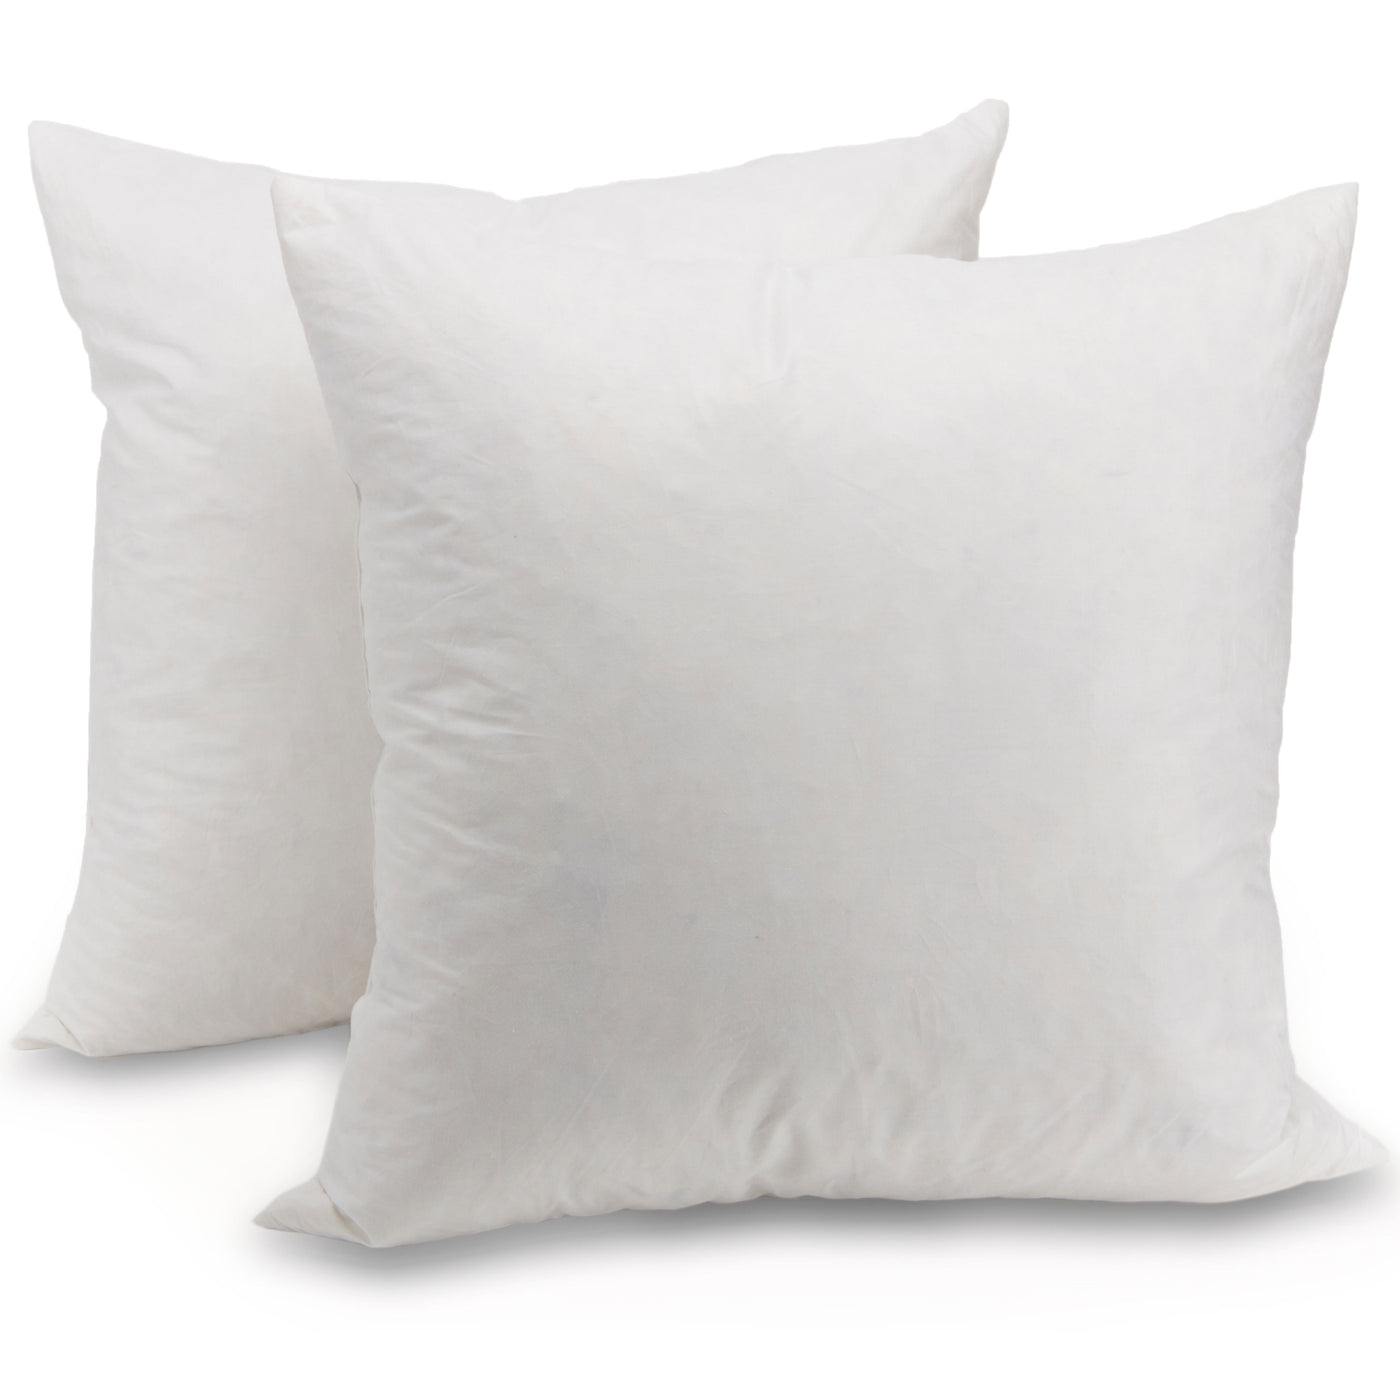 Pillow Insert Form Cushion,hypoallergenic Square Throw Pillow